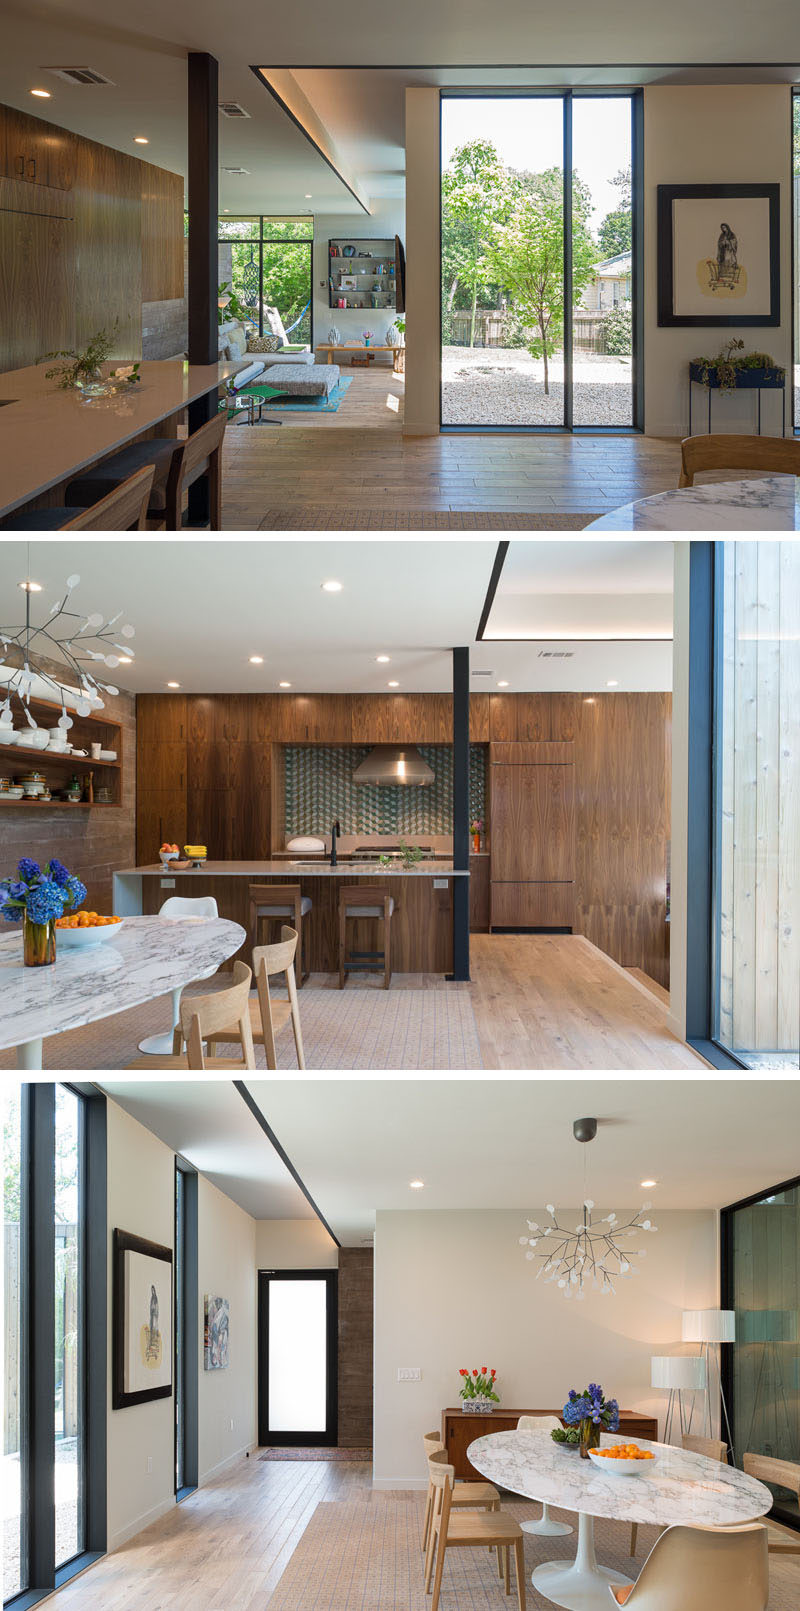 Stepped up from the living room in this house, is the kitchen and dining room. Wooden kitchen cabinets line the wall, with the island incorporating a column into its design. A sculptural chandelier helps to anchor the dining area in the space.